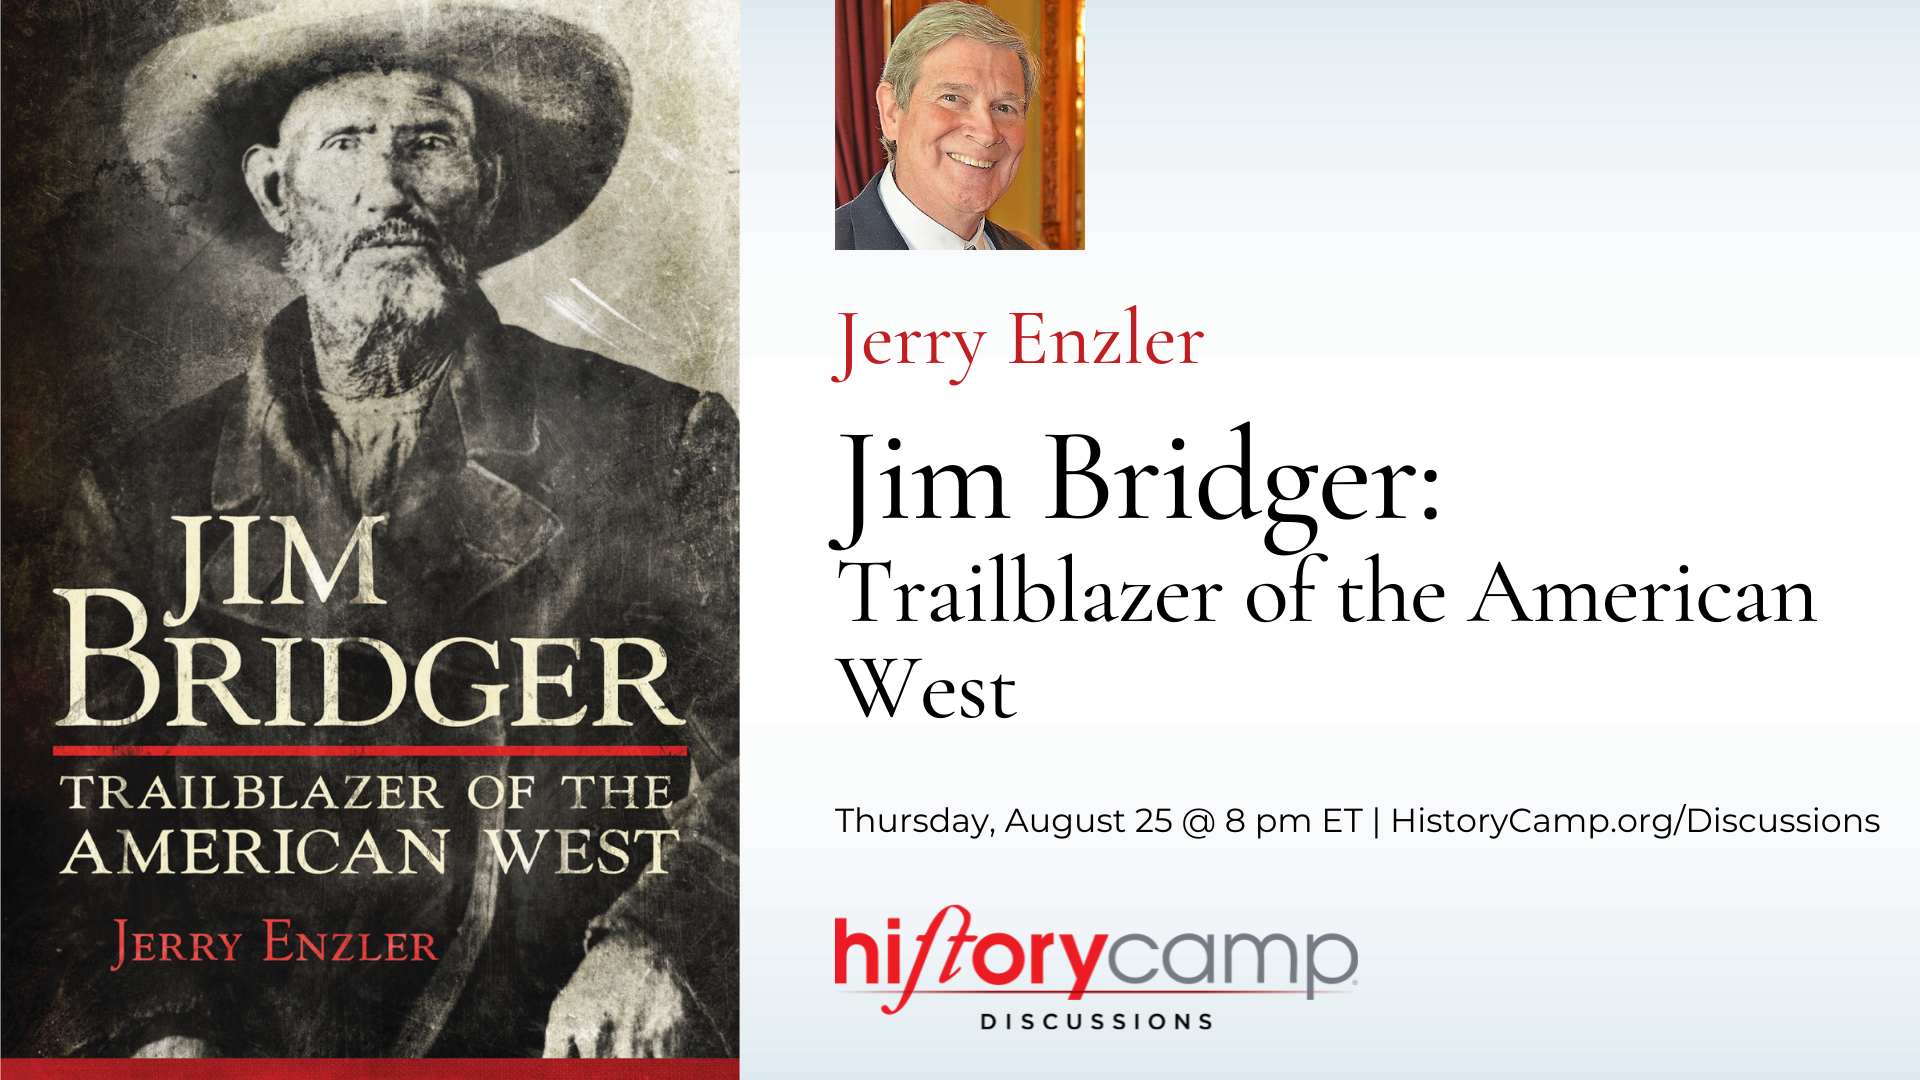 History Camp Discussion with Jerry Enzler - Jim Bridger